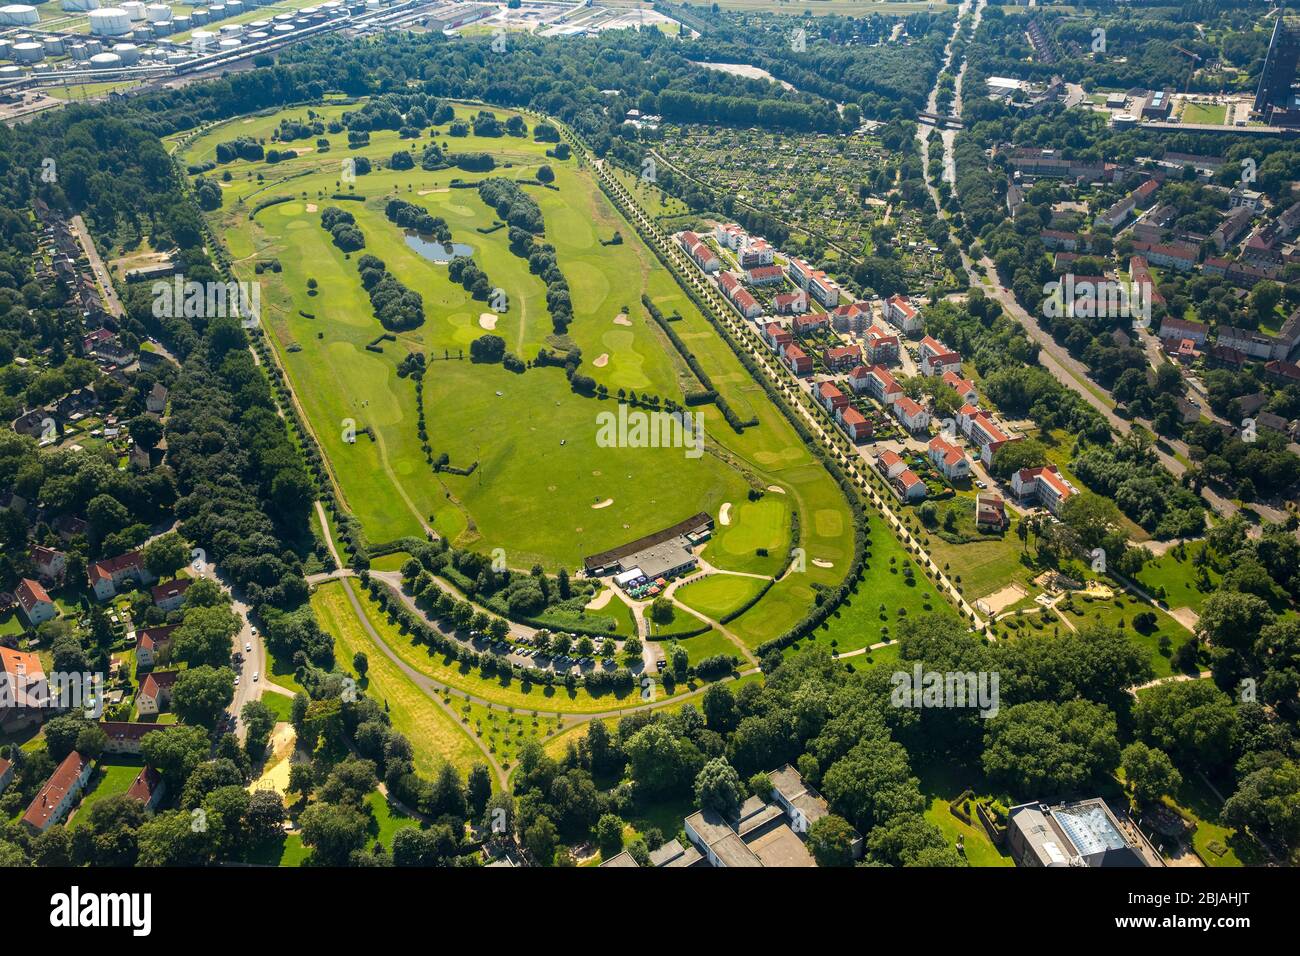 , Grounds of the Golf course at Golfclub Schloss Horst e.V. on Johannastrasse in Gelsenkirchen, 19.07.2016, aerial view, Germany, North Rhine-Westphalia, Ruhr Area, Gelsenkirchen Stock Photo